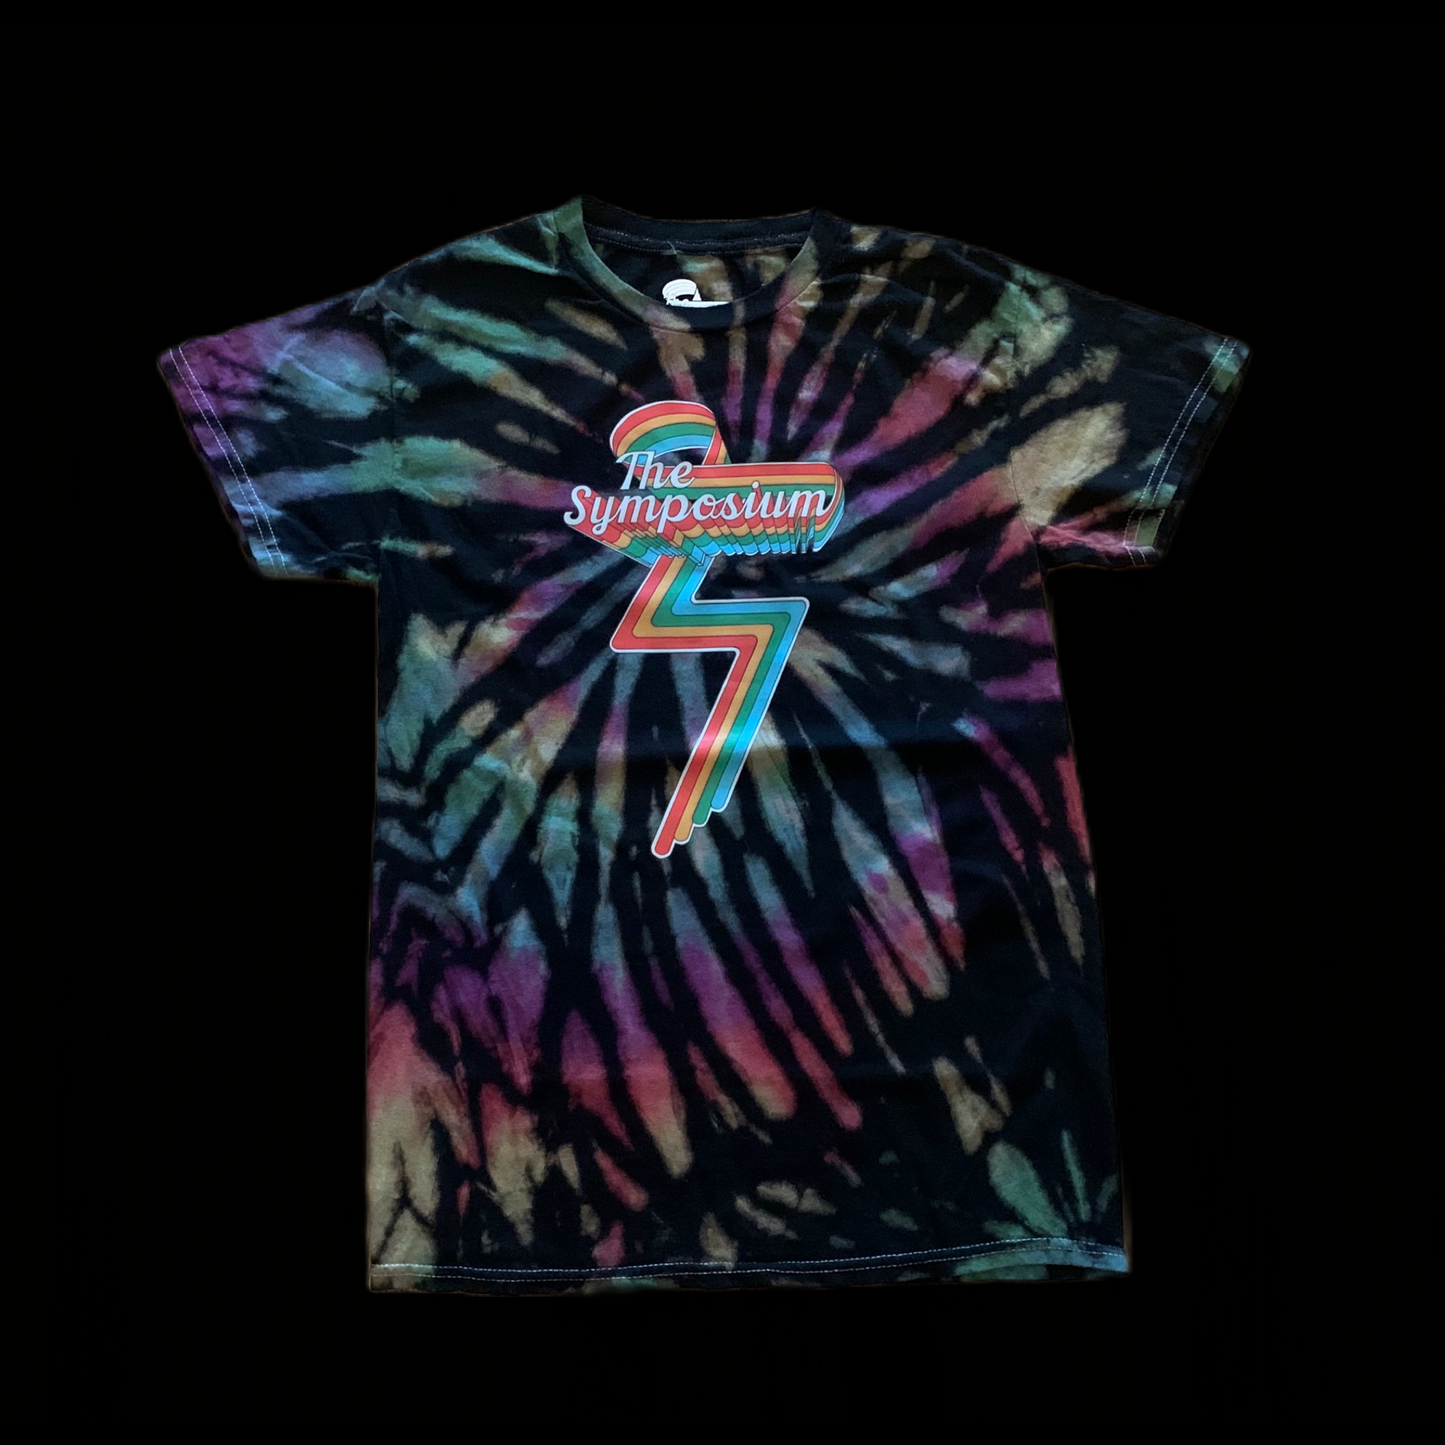 The Symposium Limited Tie Dye Shirt